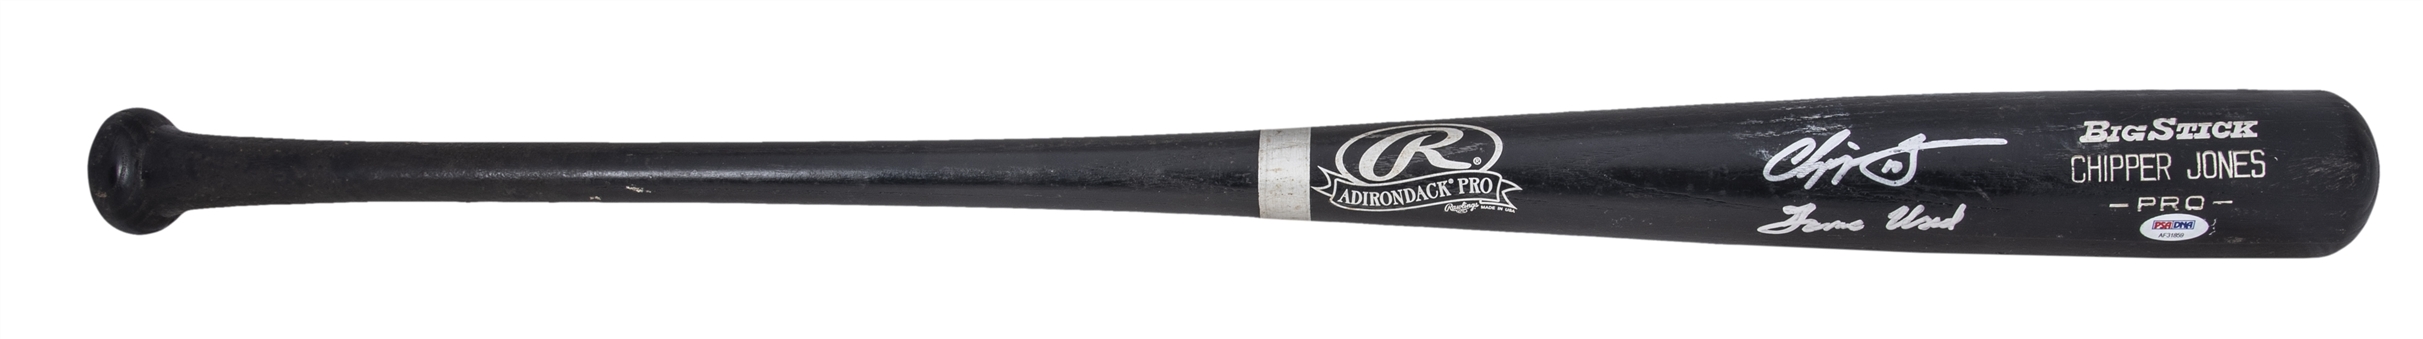 2010 Chipper Jones Game Used and Signed Big Stick A794A Model Bat with "Game Used" Inscription (PSA/DNA GU 10)